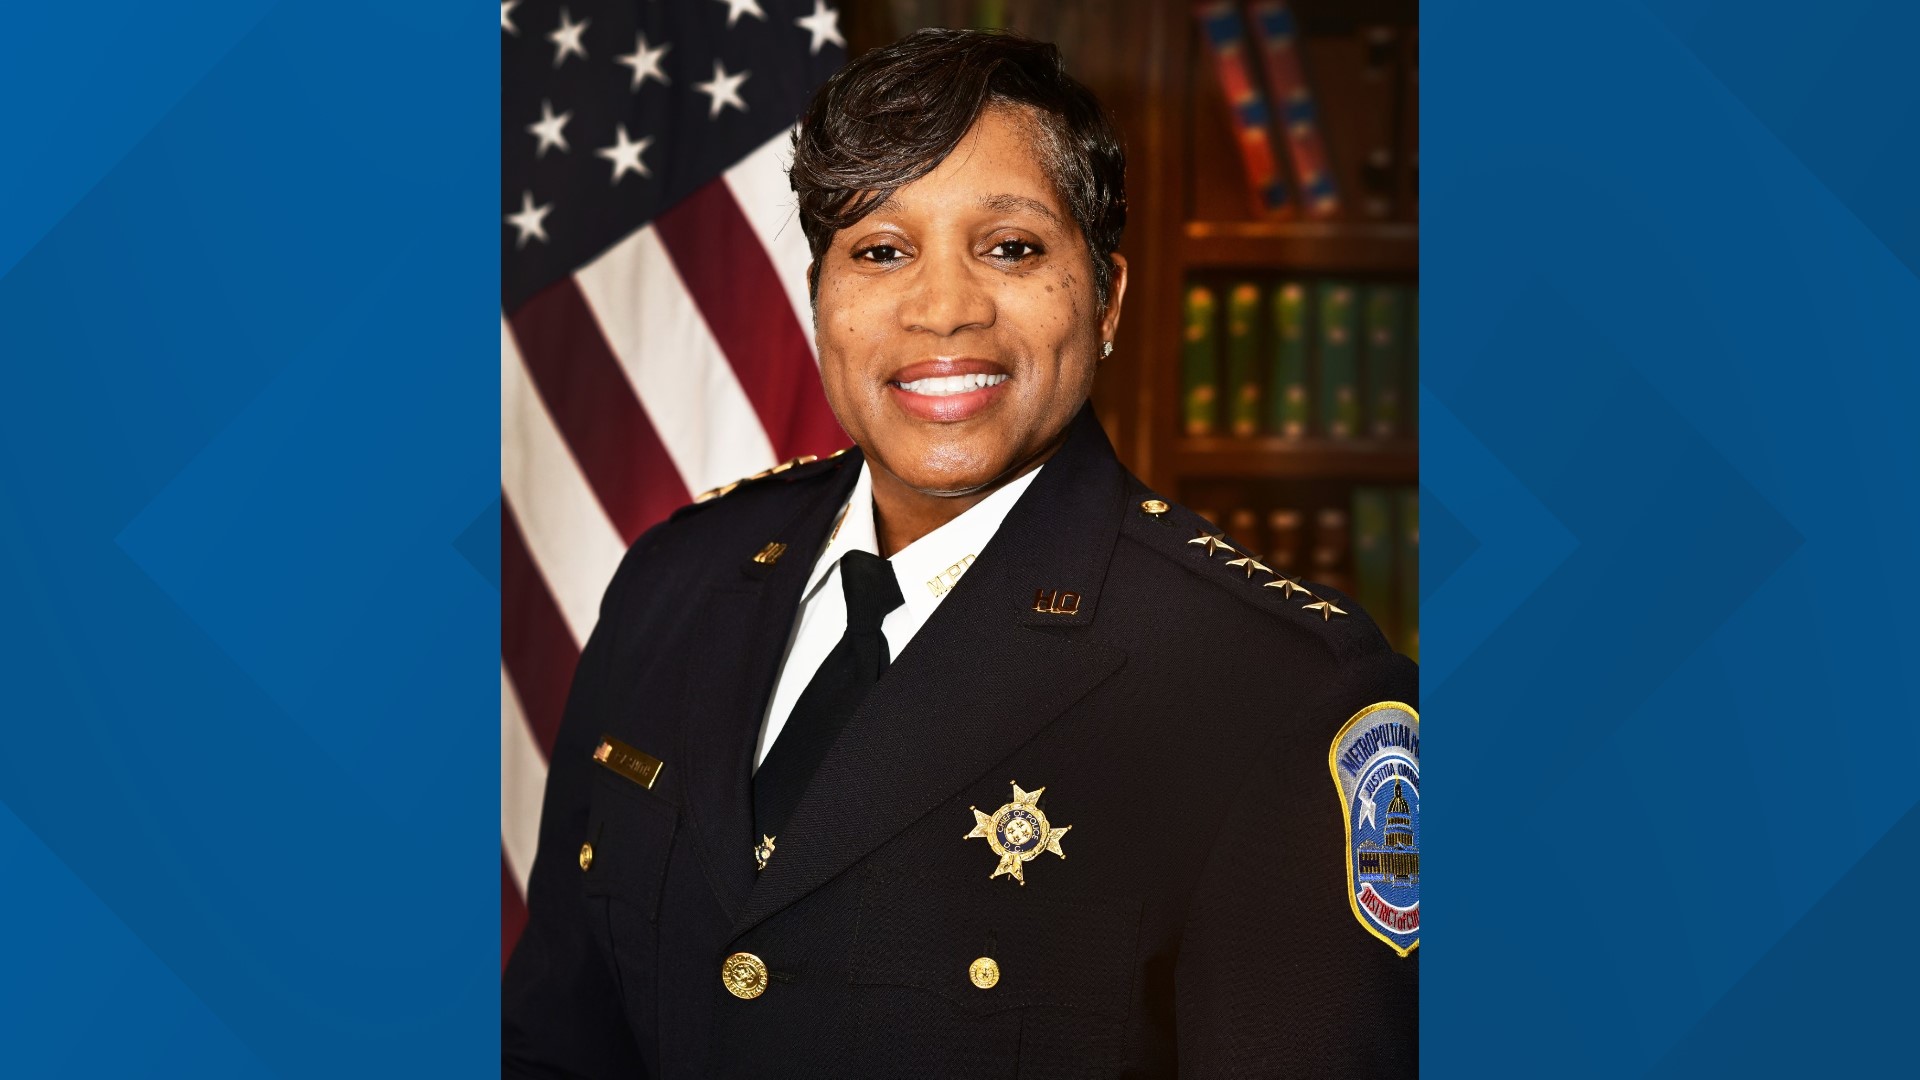 The DC Council unanimously voted to confirm Pamela Smith to lead the metropolitan police department.